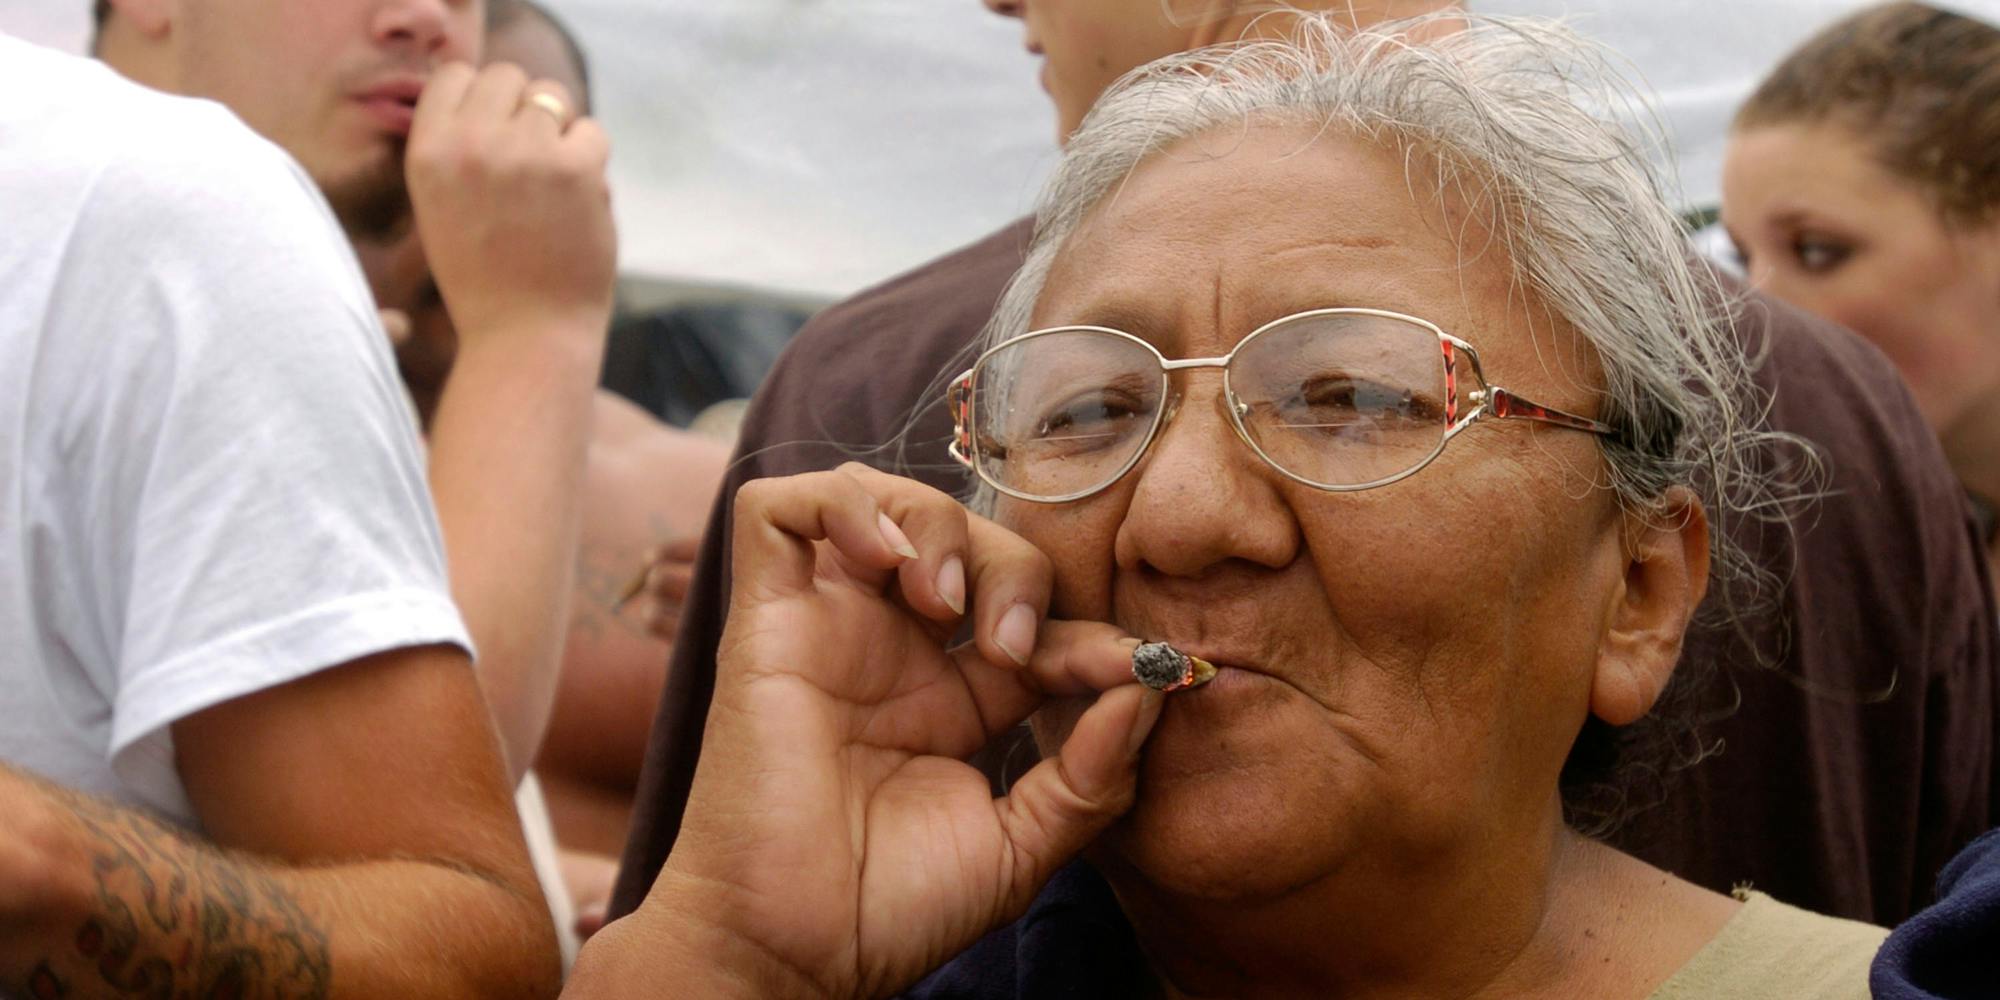 Older Americans Are 20x More Likely To Be Getting High Than They Were Thirty Years Ago